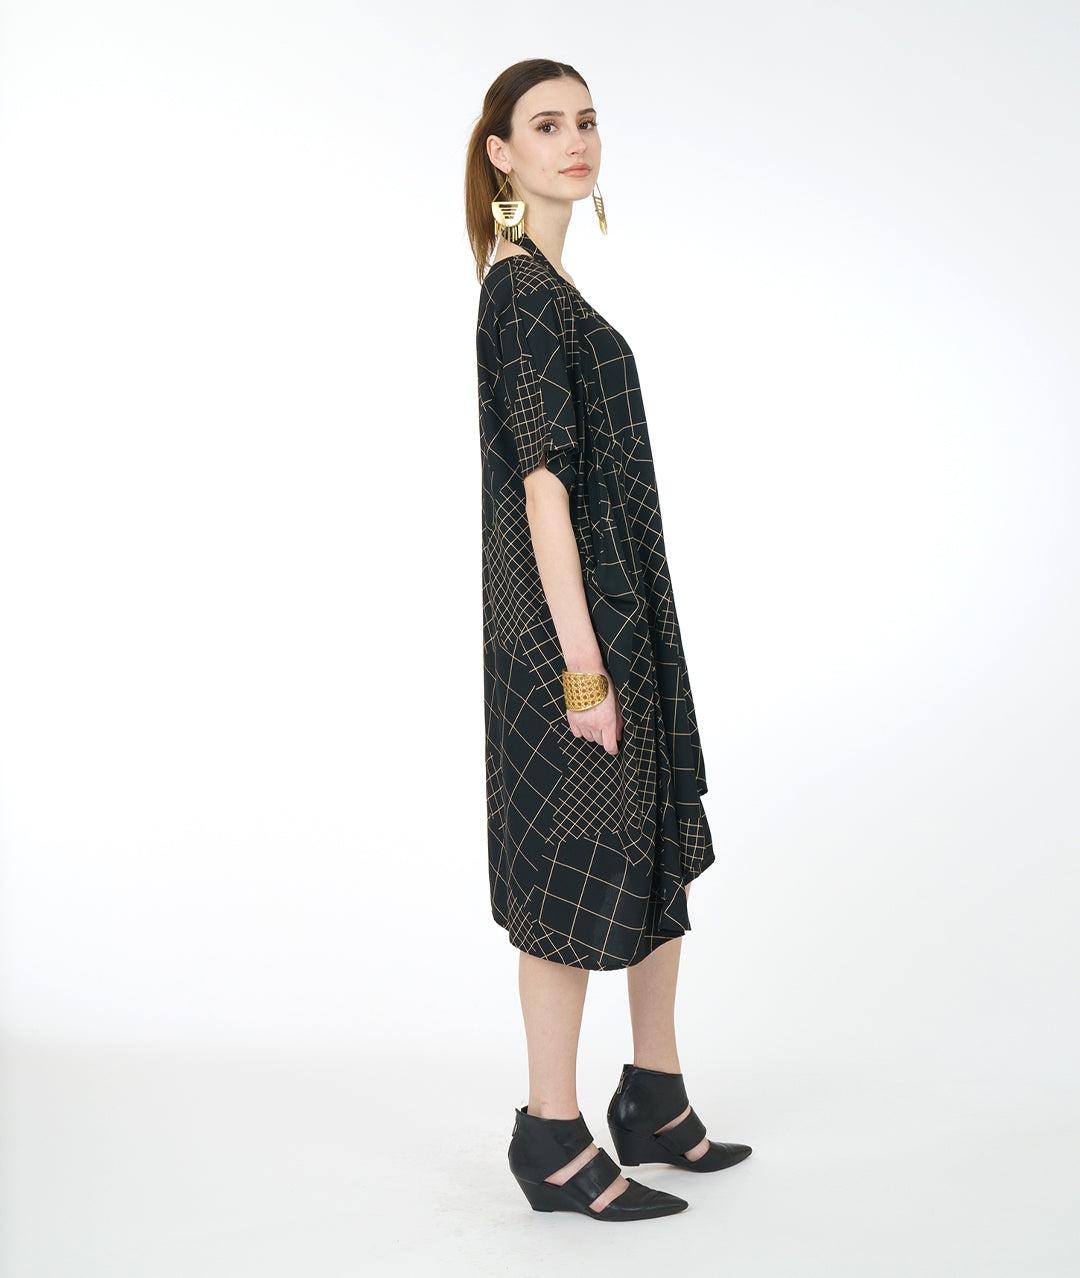 model in a black convertable tunic with an ivory grid pattern. tunic has a band from the hips that can be worn in different styles